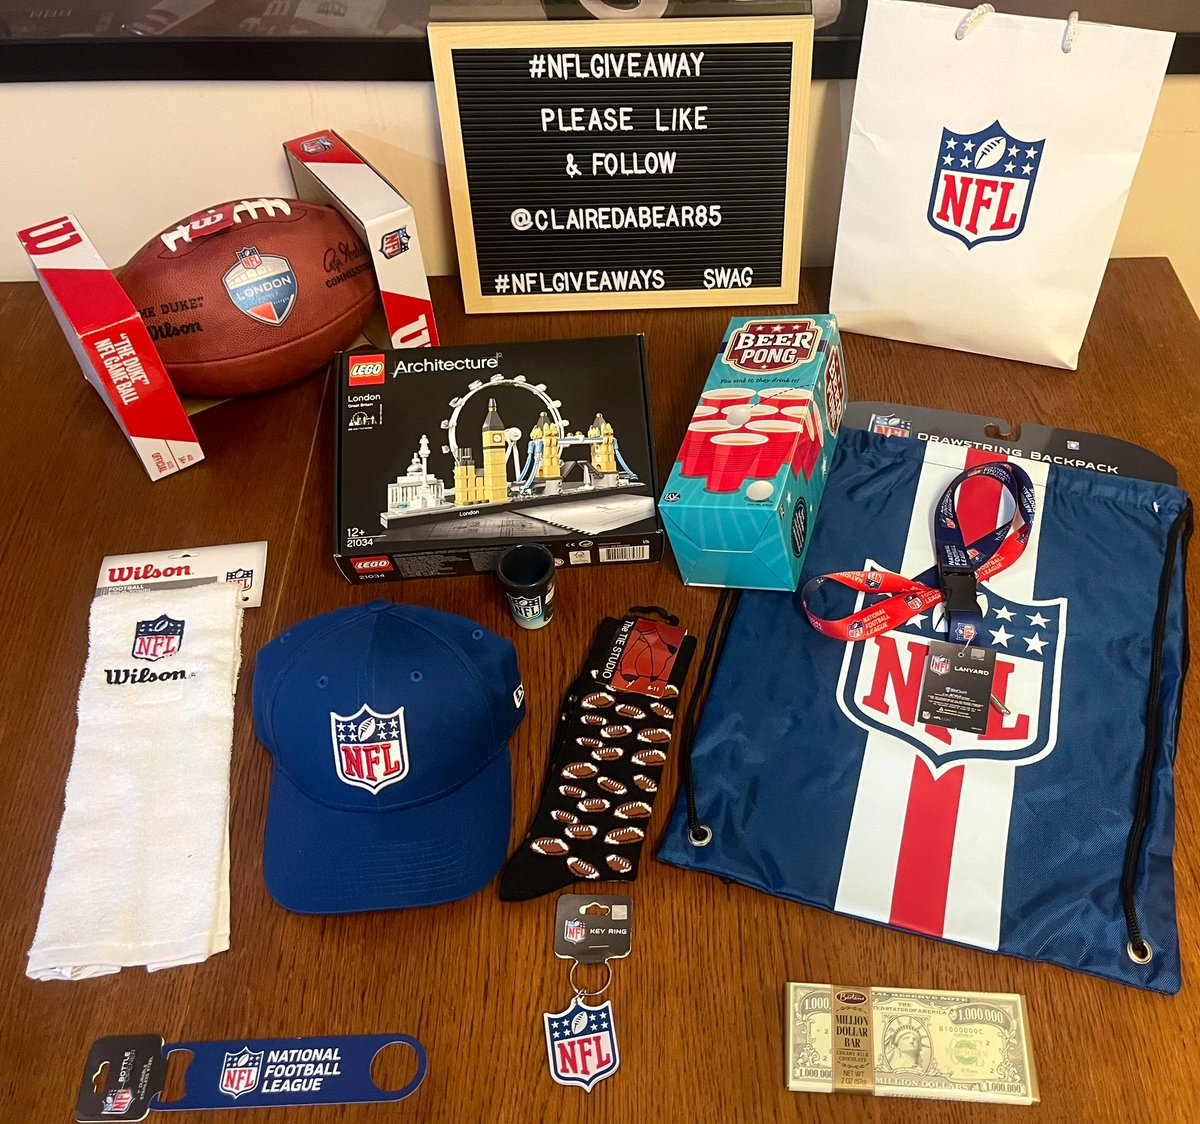 #Christmas #NFLGIVEAWAY For a chance 2 #win this #prize You MUST b following @clairedabear85 & RT & like this link. The #Giveaway will run till 29/12 & is open 2 NFL fans in the U.K. due to the weight of the #SWAG #NFLTwitter #NFL #HappyHolidays